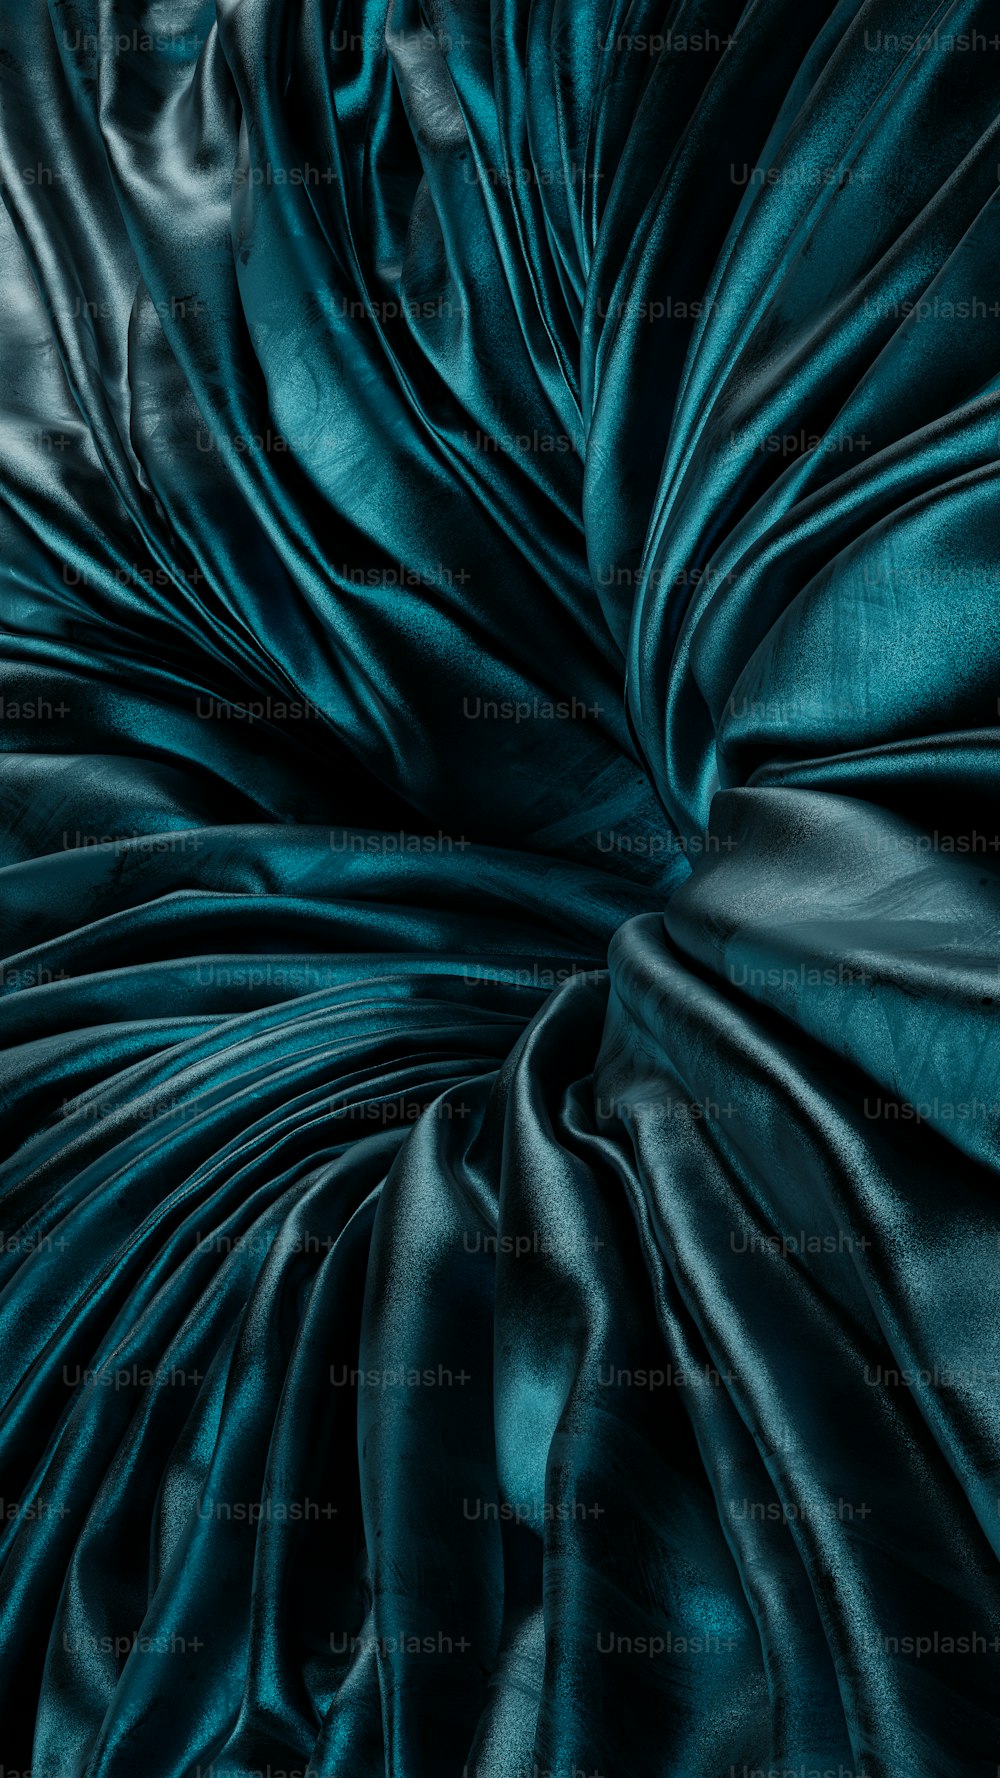 a close up view of a dark green fabric